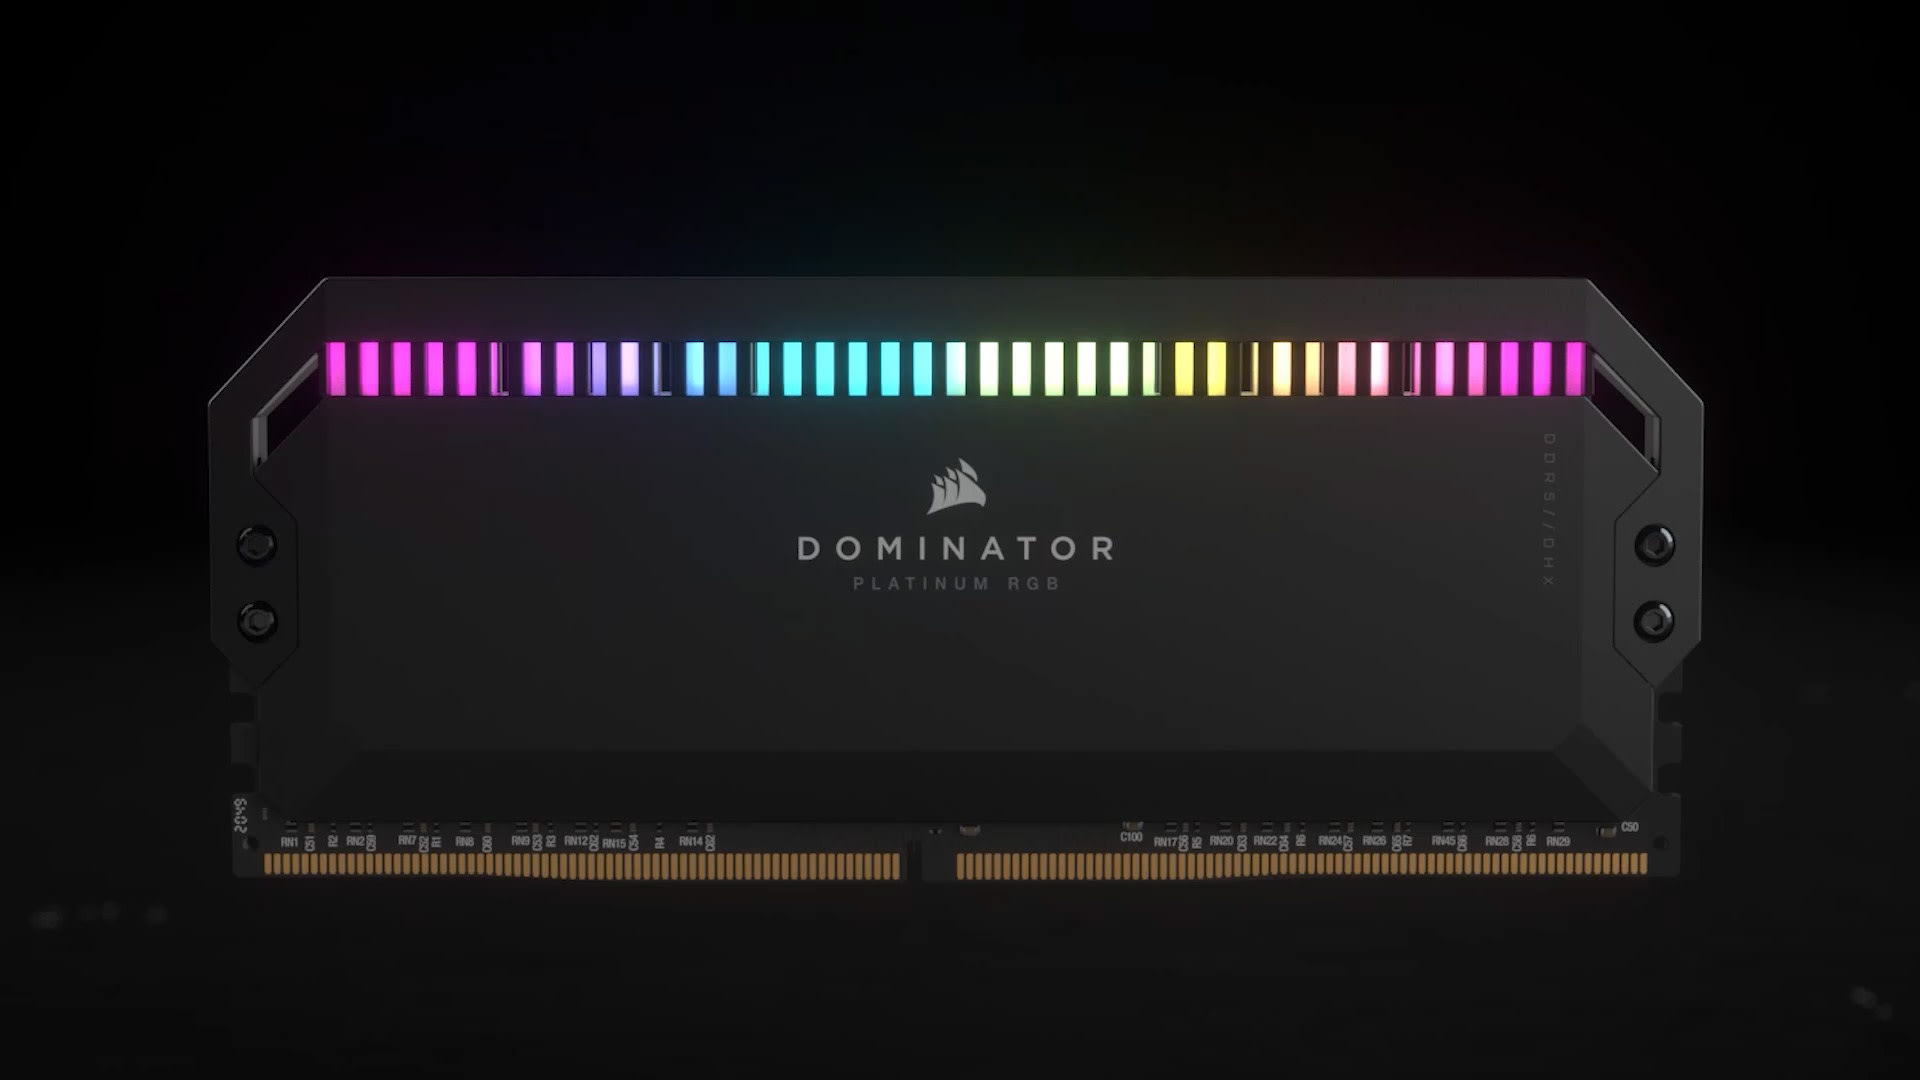 Familiar design, even faster ICs – Corsair Dominator Platinum RGB DDR5-6200  CL36 2x 16 GB kit review with teardown and OC